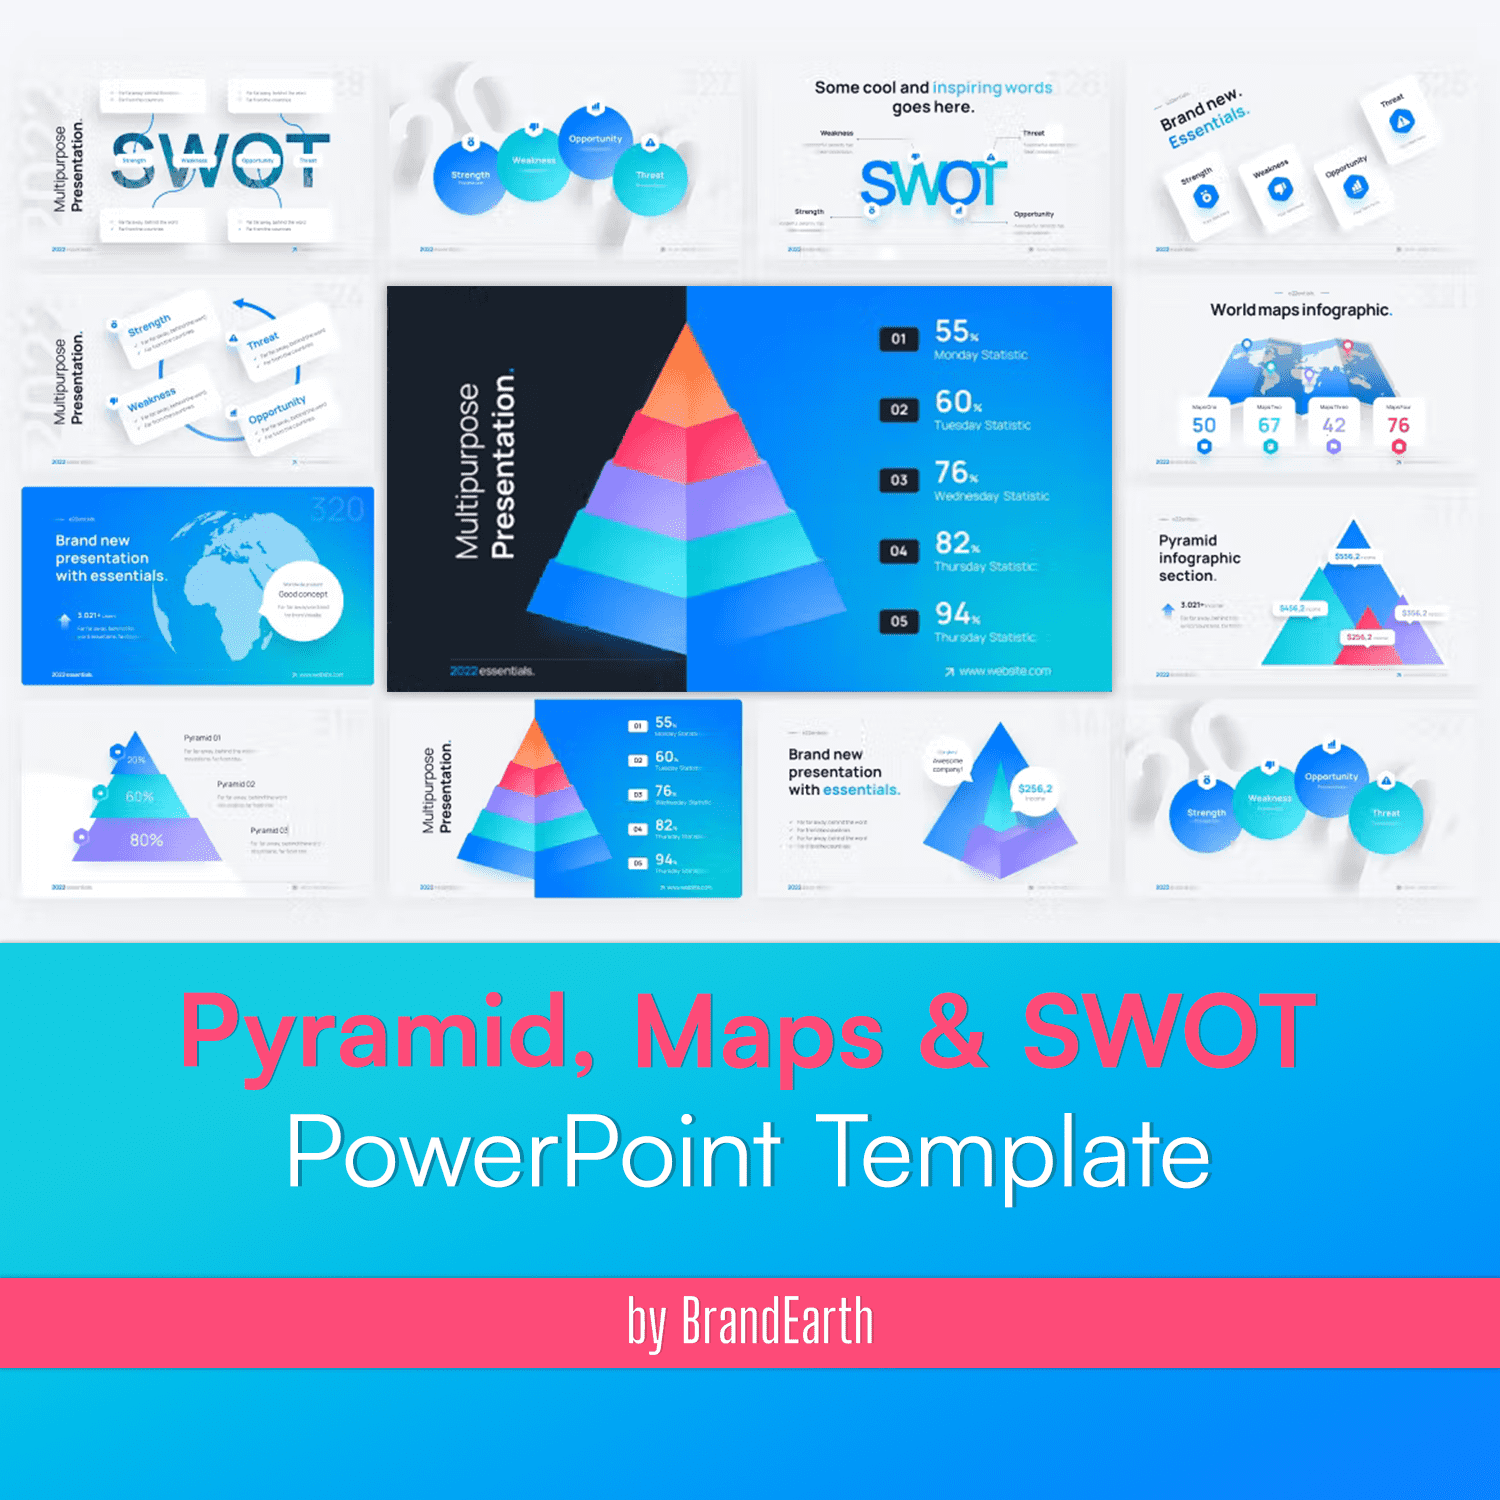 Pyramid, Maps & Swot PowerPoint Template Cover.